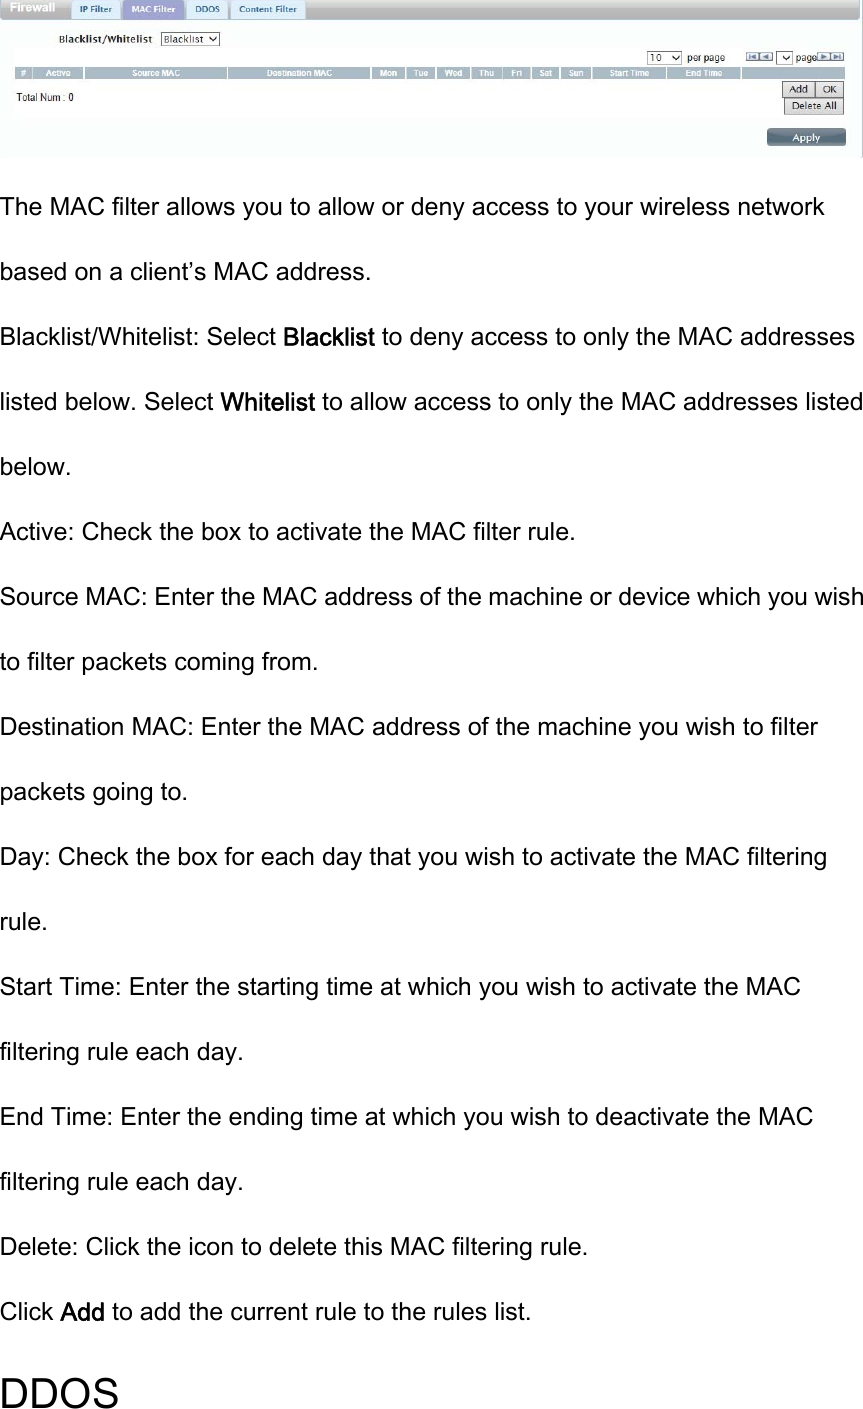  The MAC filter allows you to allow or deny access to your wireless network based on a client’s MAC address. Blacklist/Whitelist: Select Blacklist to deny access to only the MAC addresses listed below. Select Whitelist to allow access to only the MAC addresses listed below. Active: Check the box to activate the MAC filter rule. Source MAC: Enter the MAC address of the machine or device which you wish to filter packets coming from. Destination MAC: Enter the MAC address of the machine you wish to filter packets going to. Day: Check the box for each day that you wish to activate the MAC filtering rule. Start Time: Enter the starting time at which you wish to activate the MAC filtering rule each day. End Time: Enter the ending time at which you wish to deactivate the MAC filtering rule each day. Delete: Click the icon to delete this MAC filtering rule. Click Add to add the current rule to the rules list. DDOS 